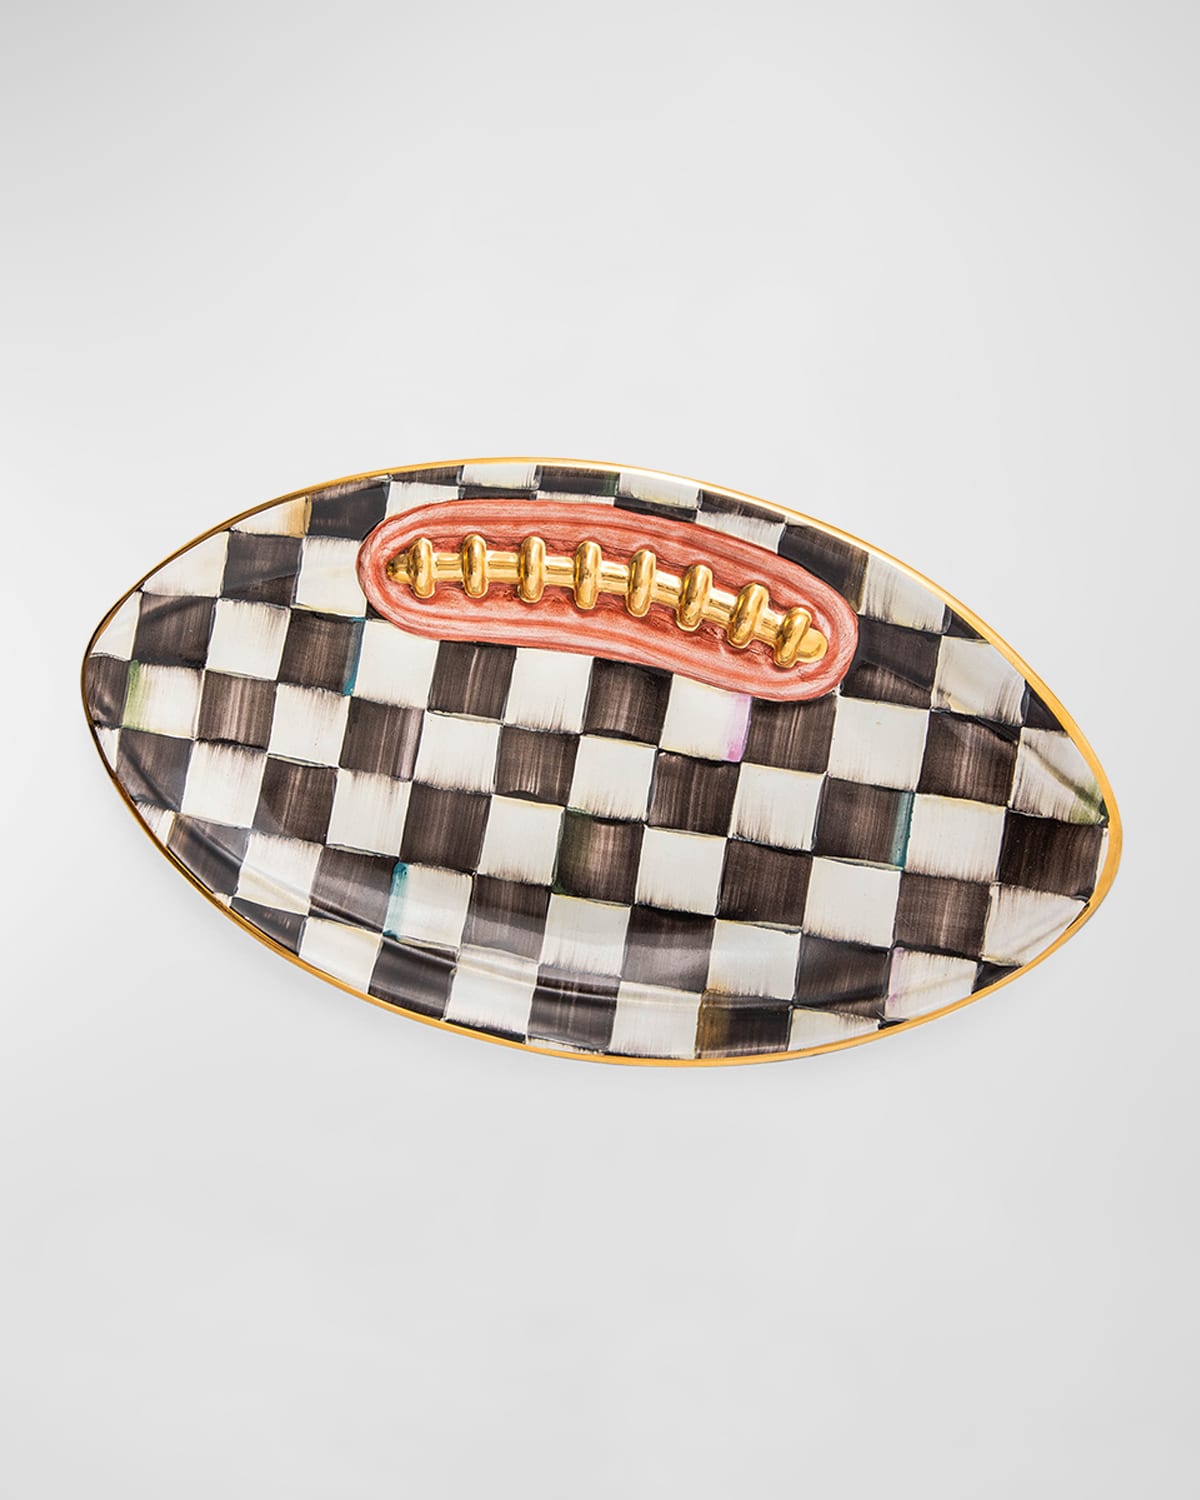 Mackenzie-childs Courtly Check Football Platter In Multi